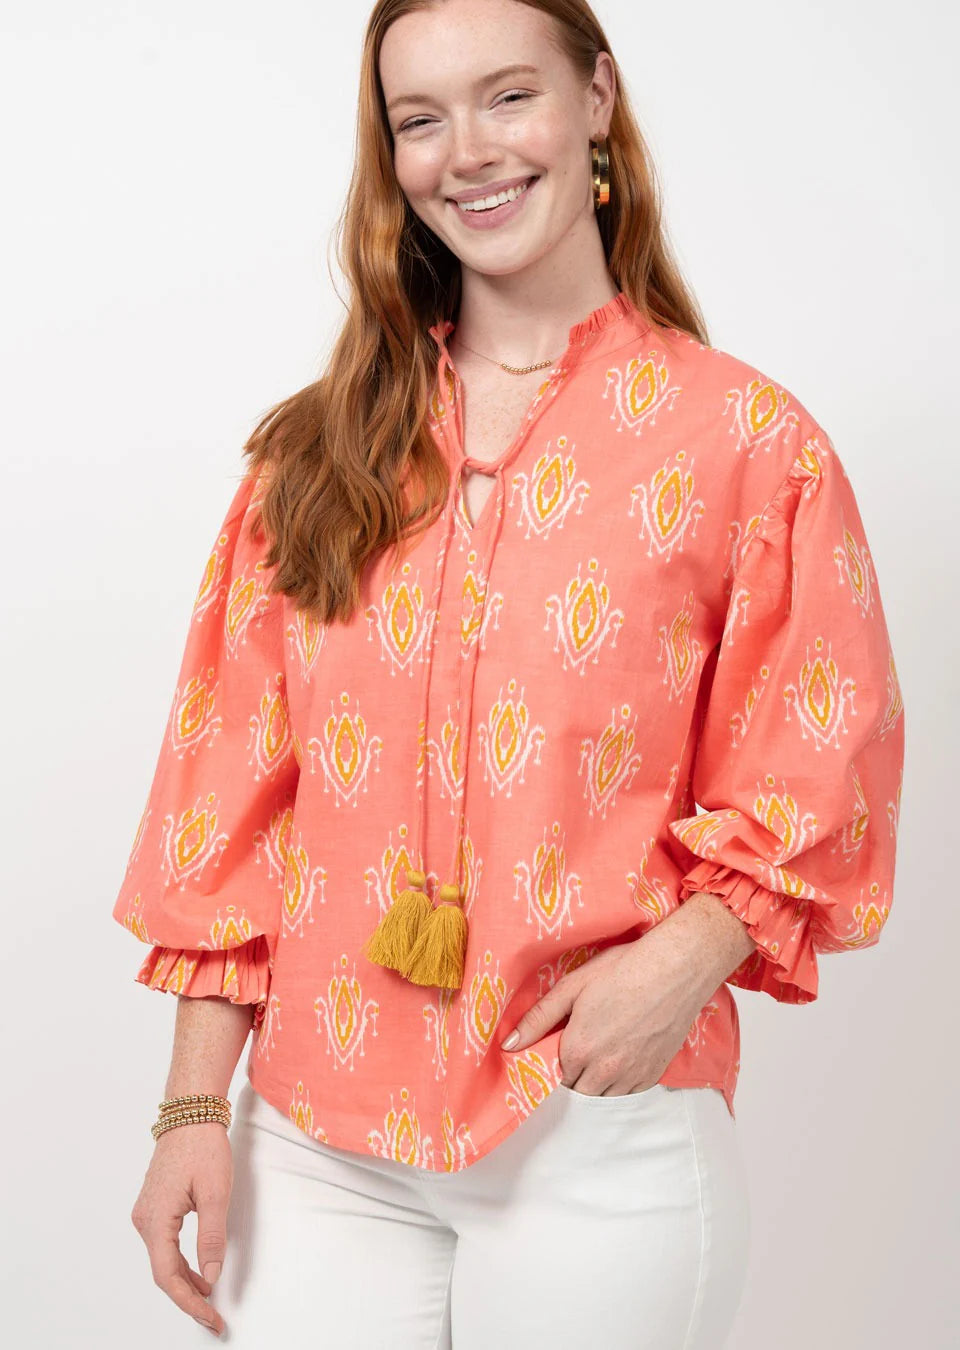 Ikat Blouson Sleeve Top in Coral - The French Shoppe